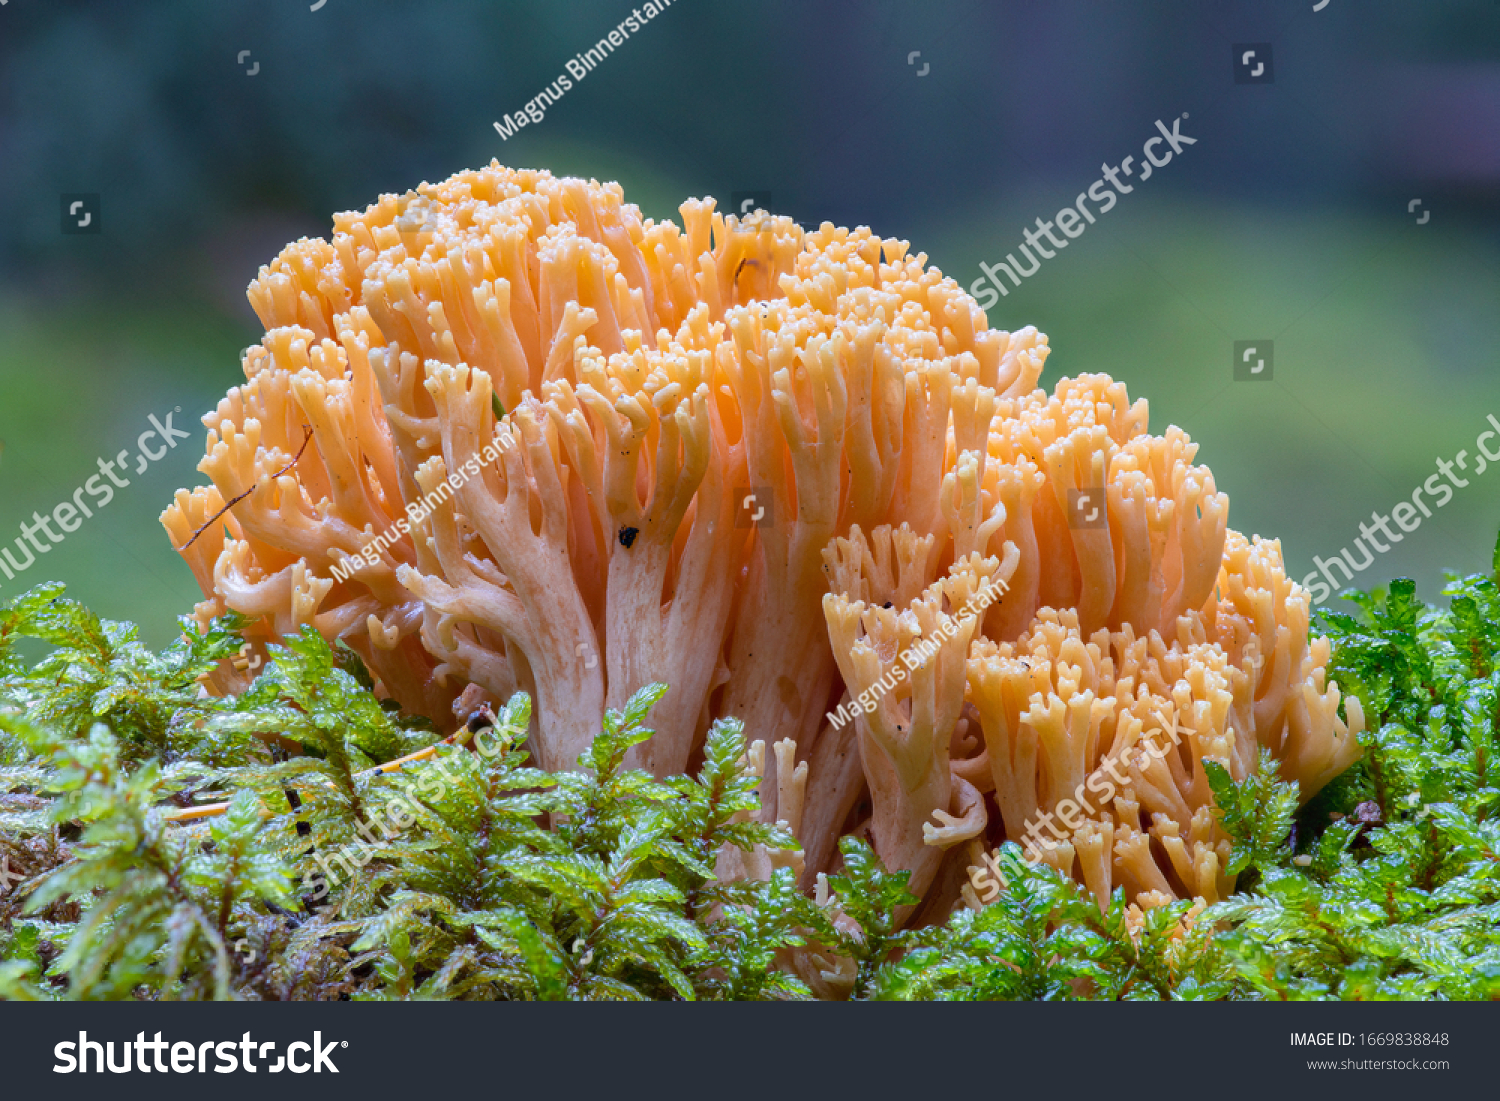 Very detailed close up of a yellow Clavaria flava or coral fungus growing in green moss. Stacked image with full focus #1669838848